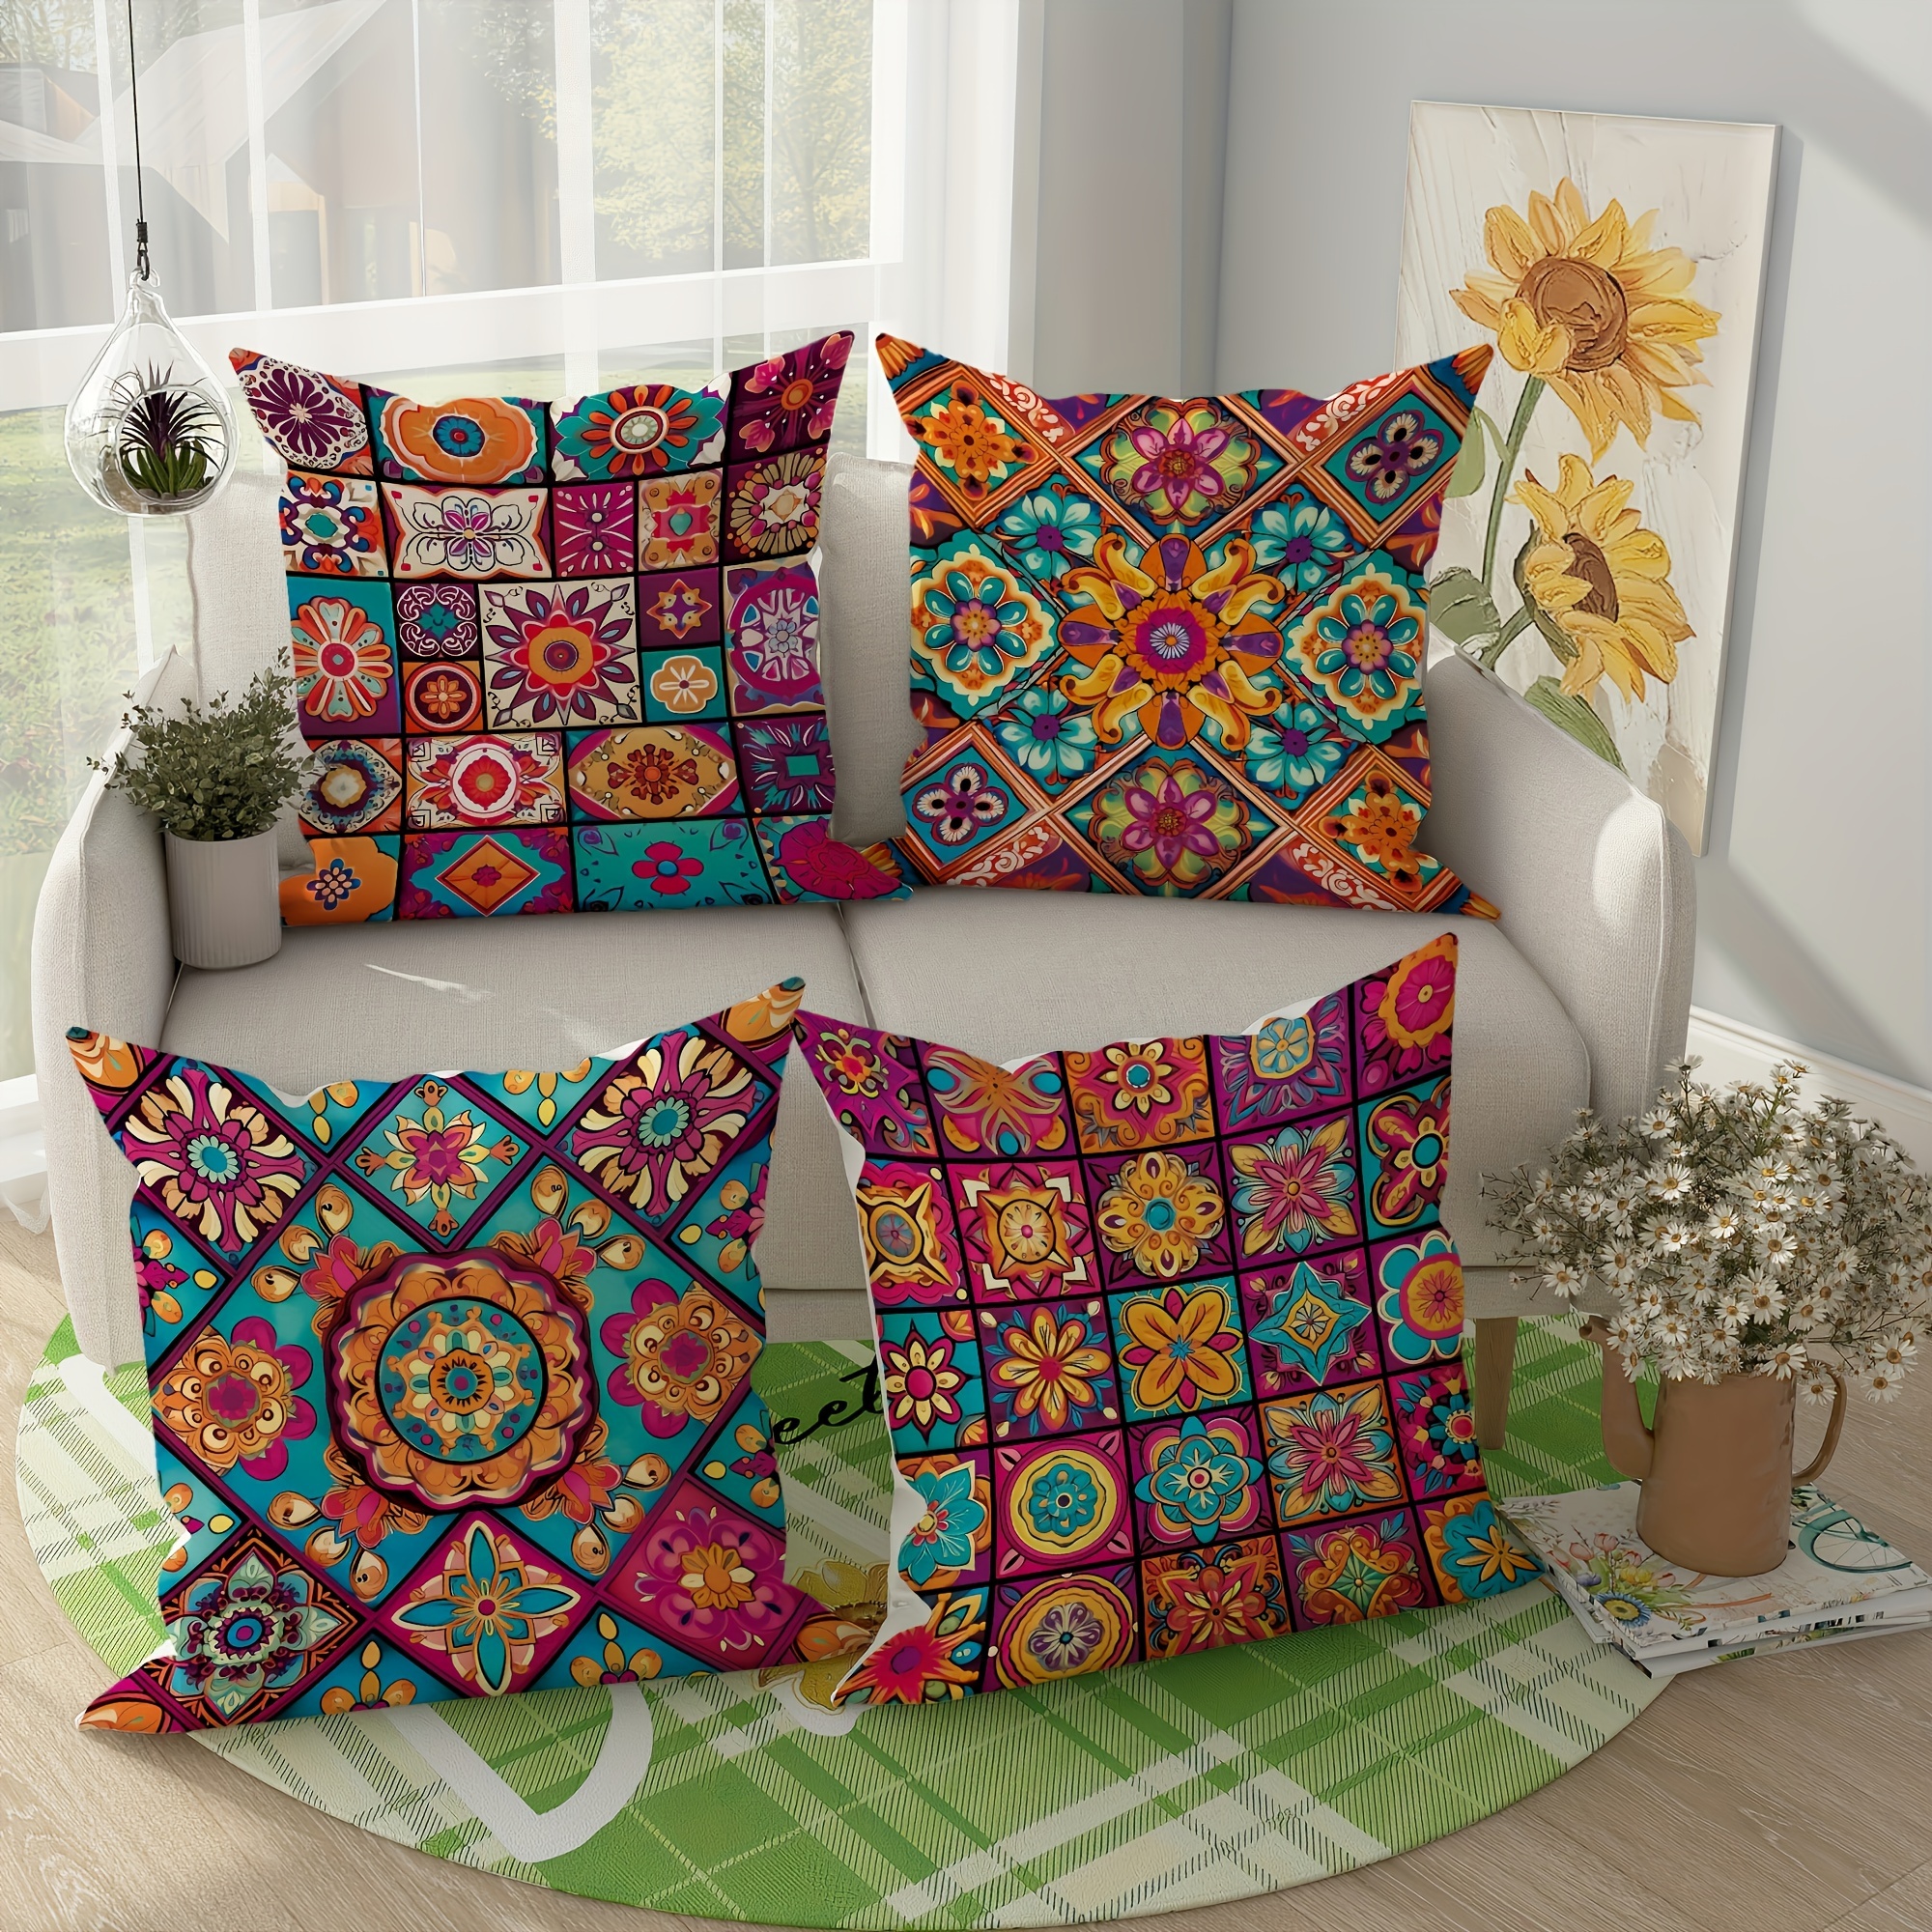 

Bohemian Throw Pillow Covers Set Of 4, Mandala & Geometric Design, Contemporary Zippered Square Cushion Cases For Home Decor, Machine Washable, Polyester, Versatile For Sofas, Beds, And Living Room